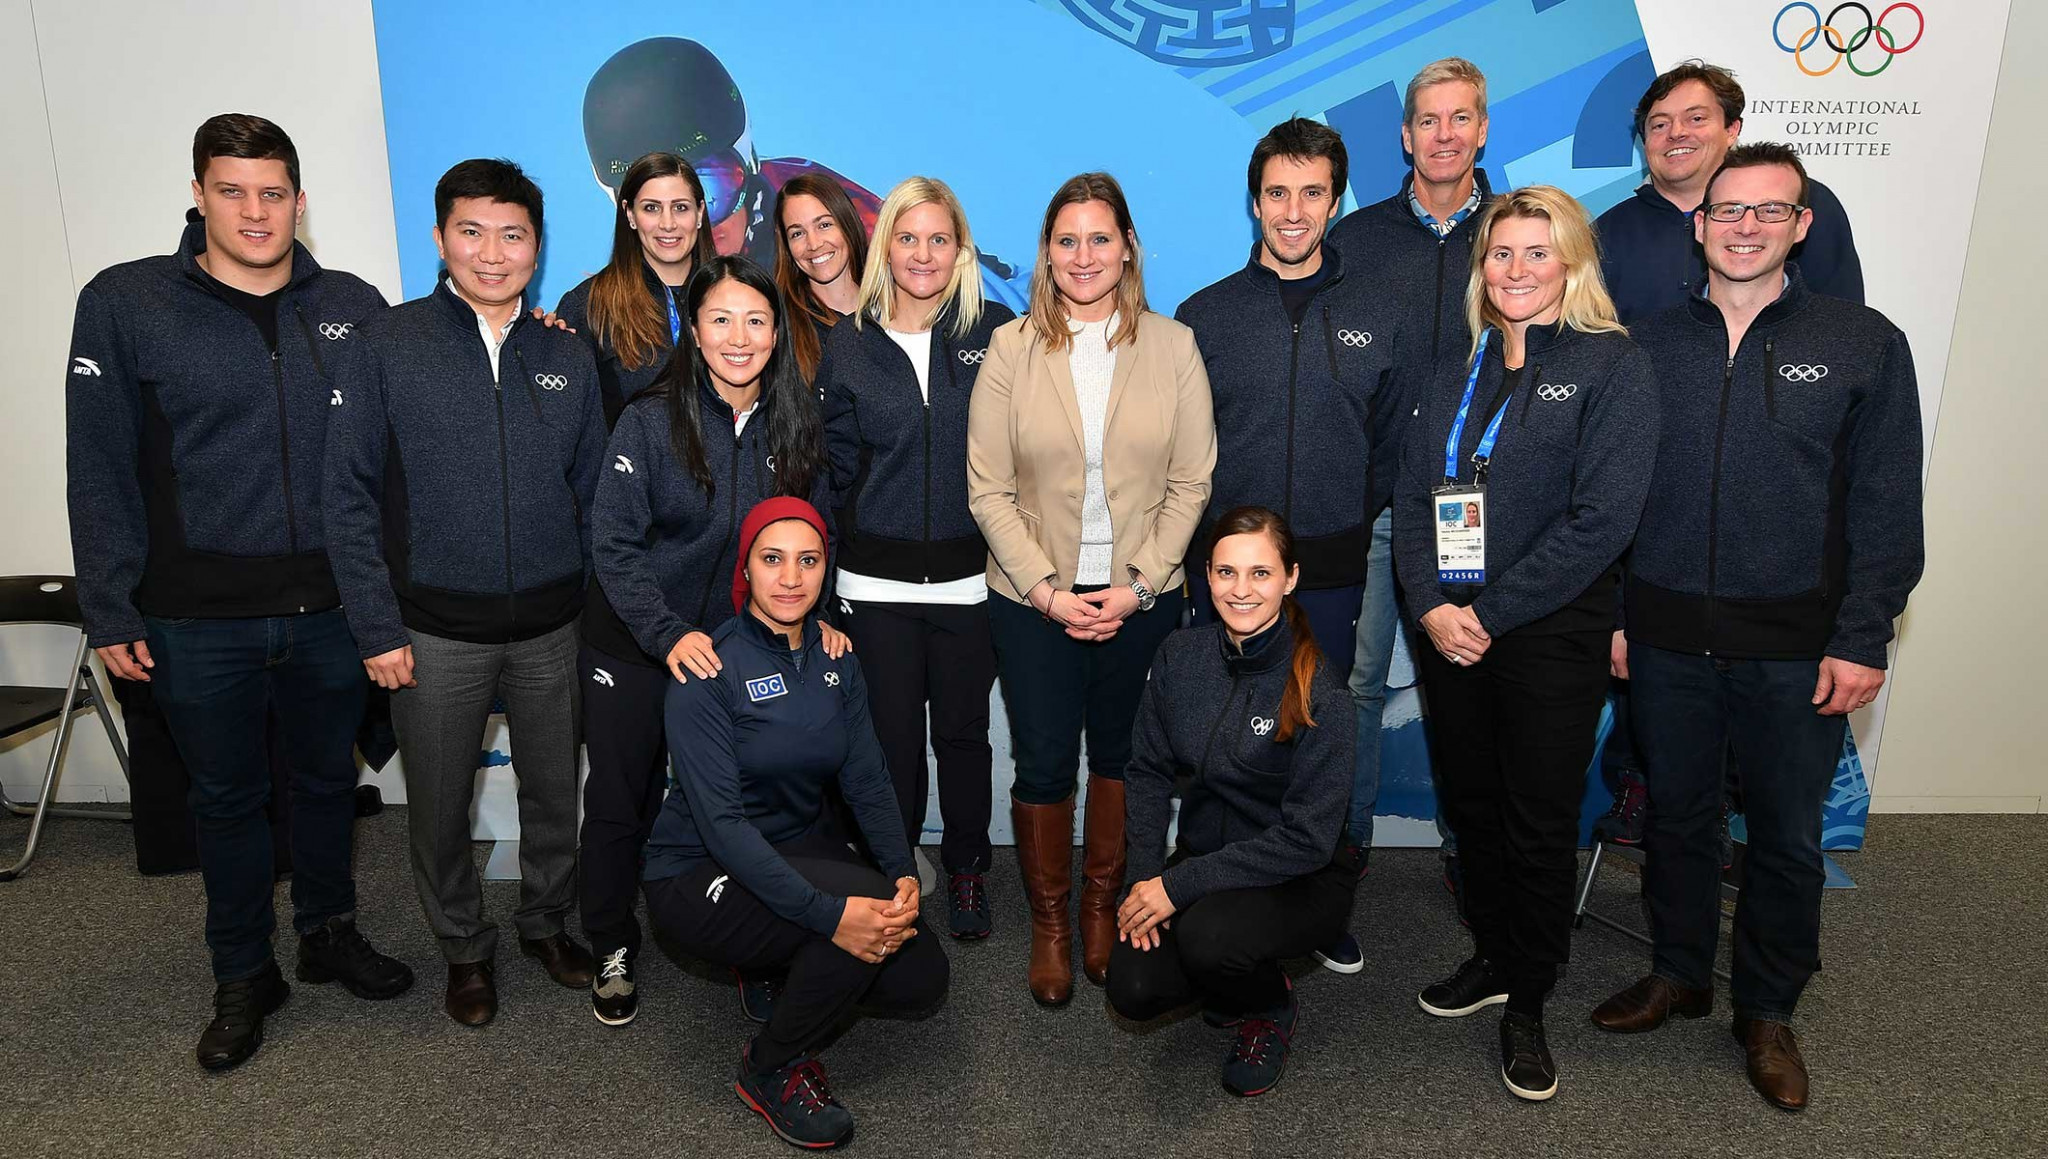 Kirsty Coventry is the new chair of the IOC Athletes' Commission ©IOC